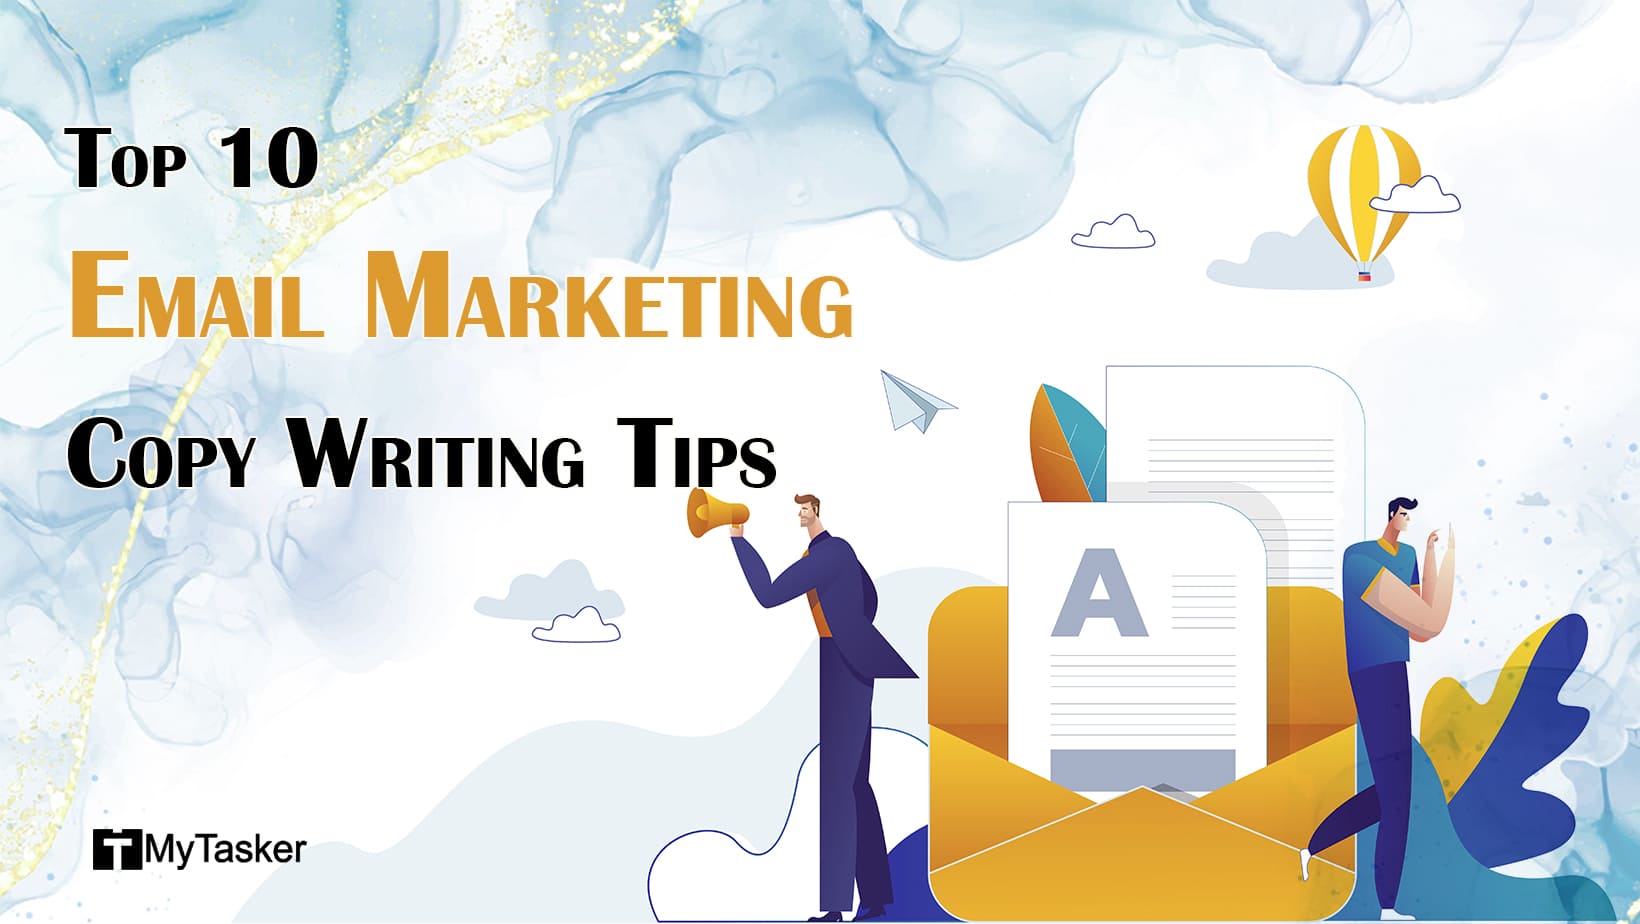 Top 10 Email Marketing Copy Writing Tips